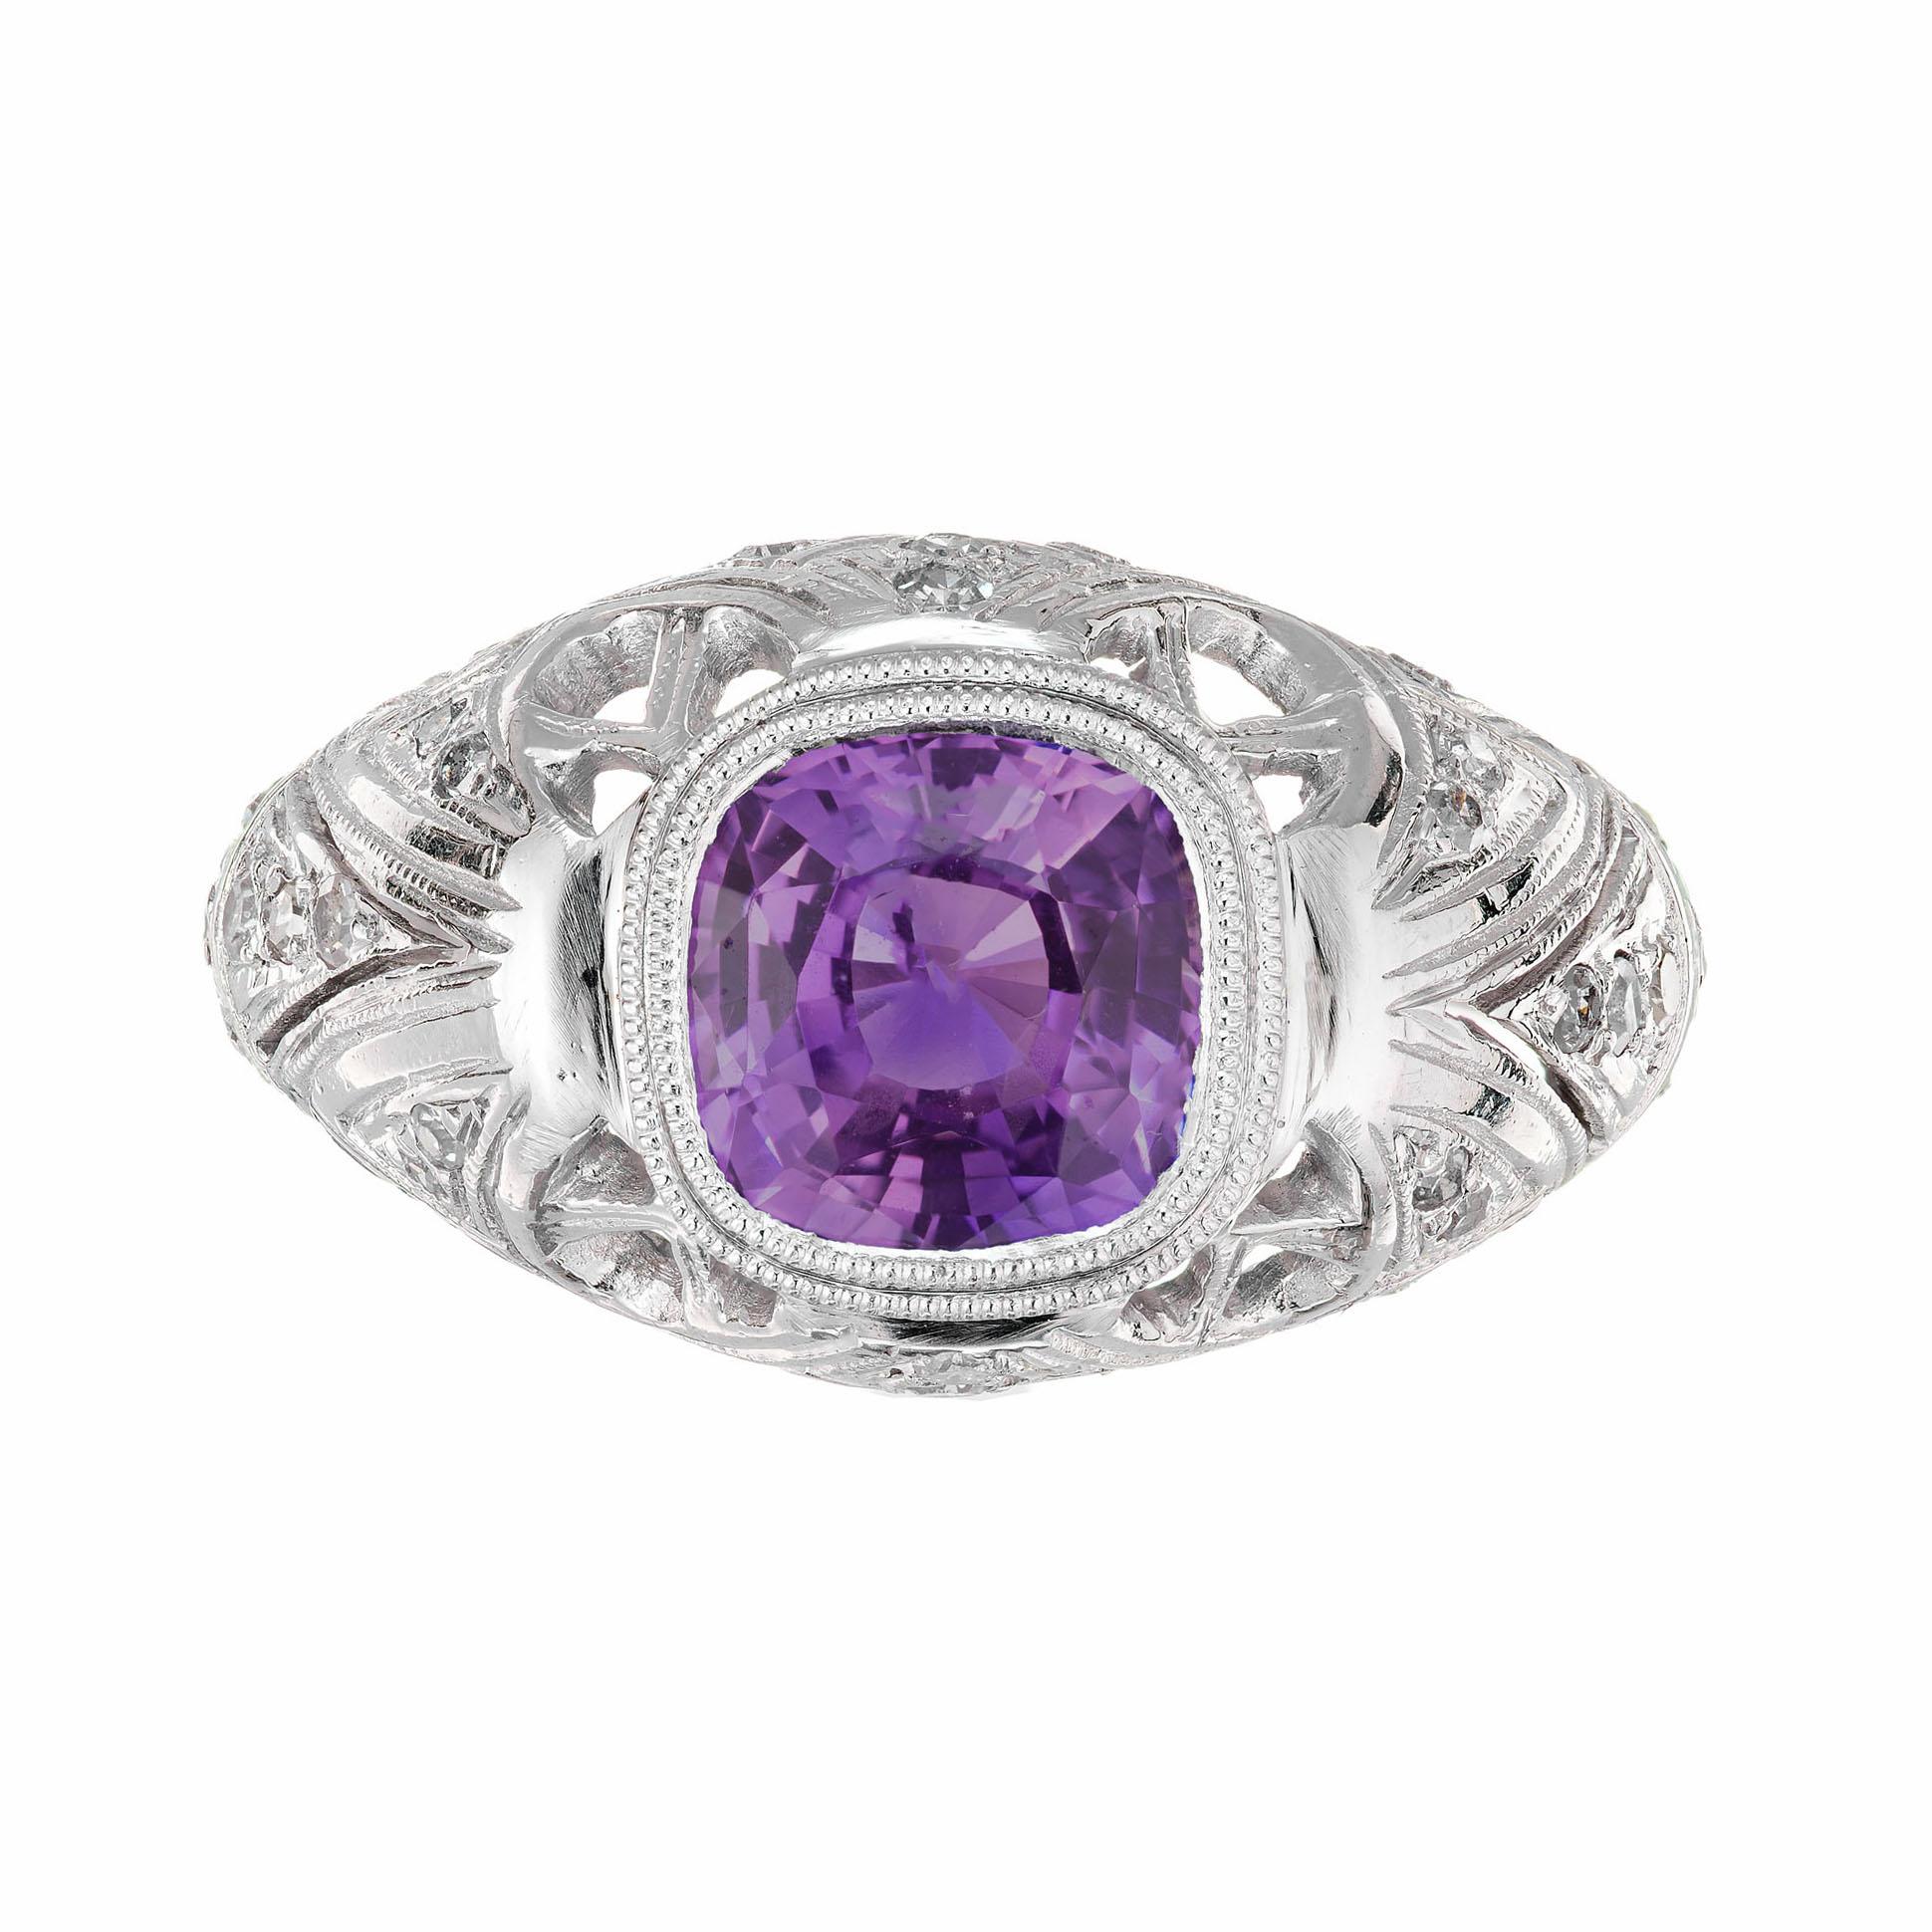 1920's Art Deco Natural purple and diamond engagement ring. GIA certified cushion cut center sapphire,  no heat, in a platinum open work domed setting with 32 old European cut accent diamonds.  

1 cushion cut purple Sapphire, approx. total weight